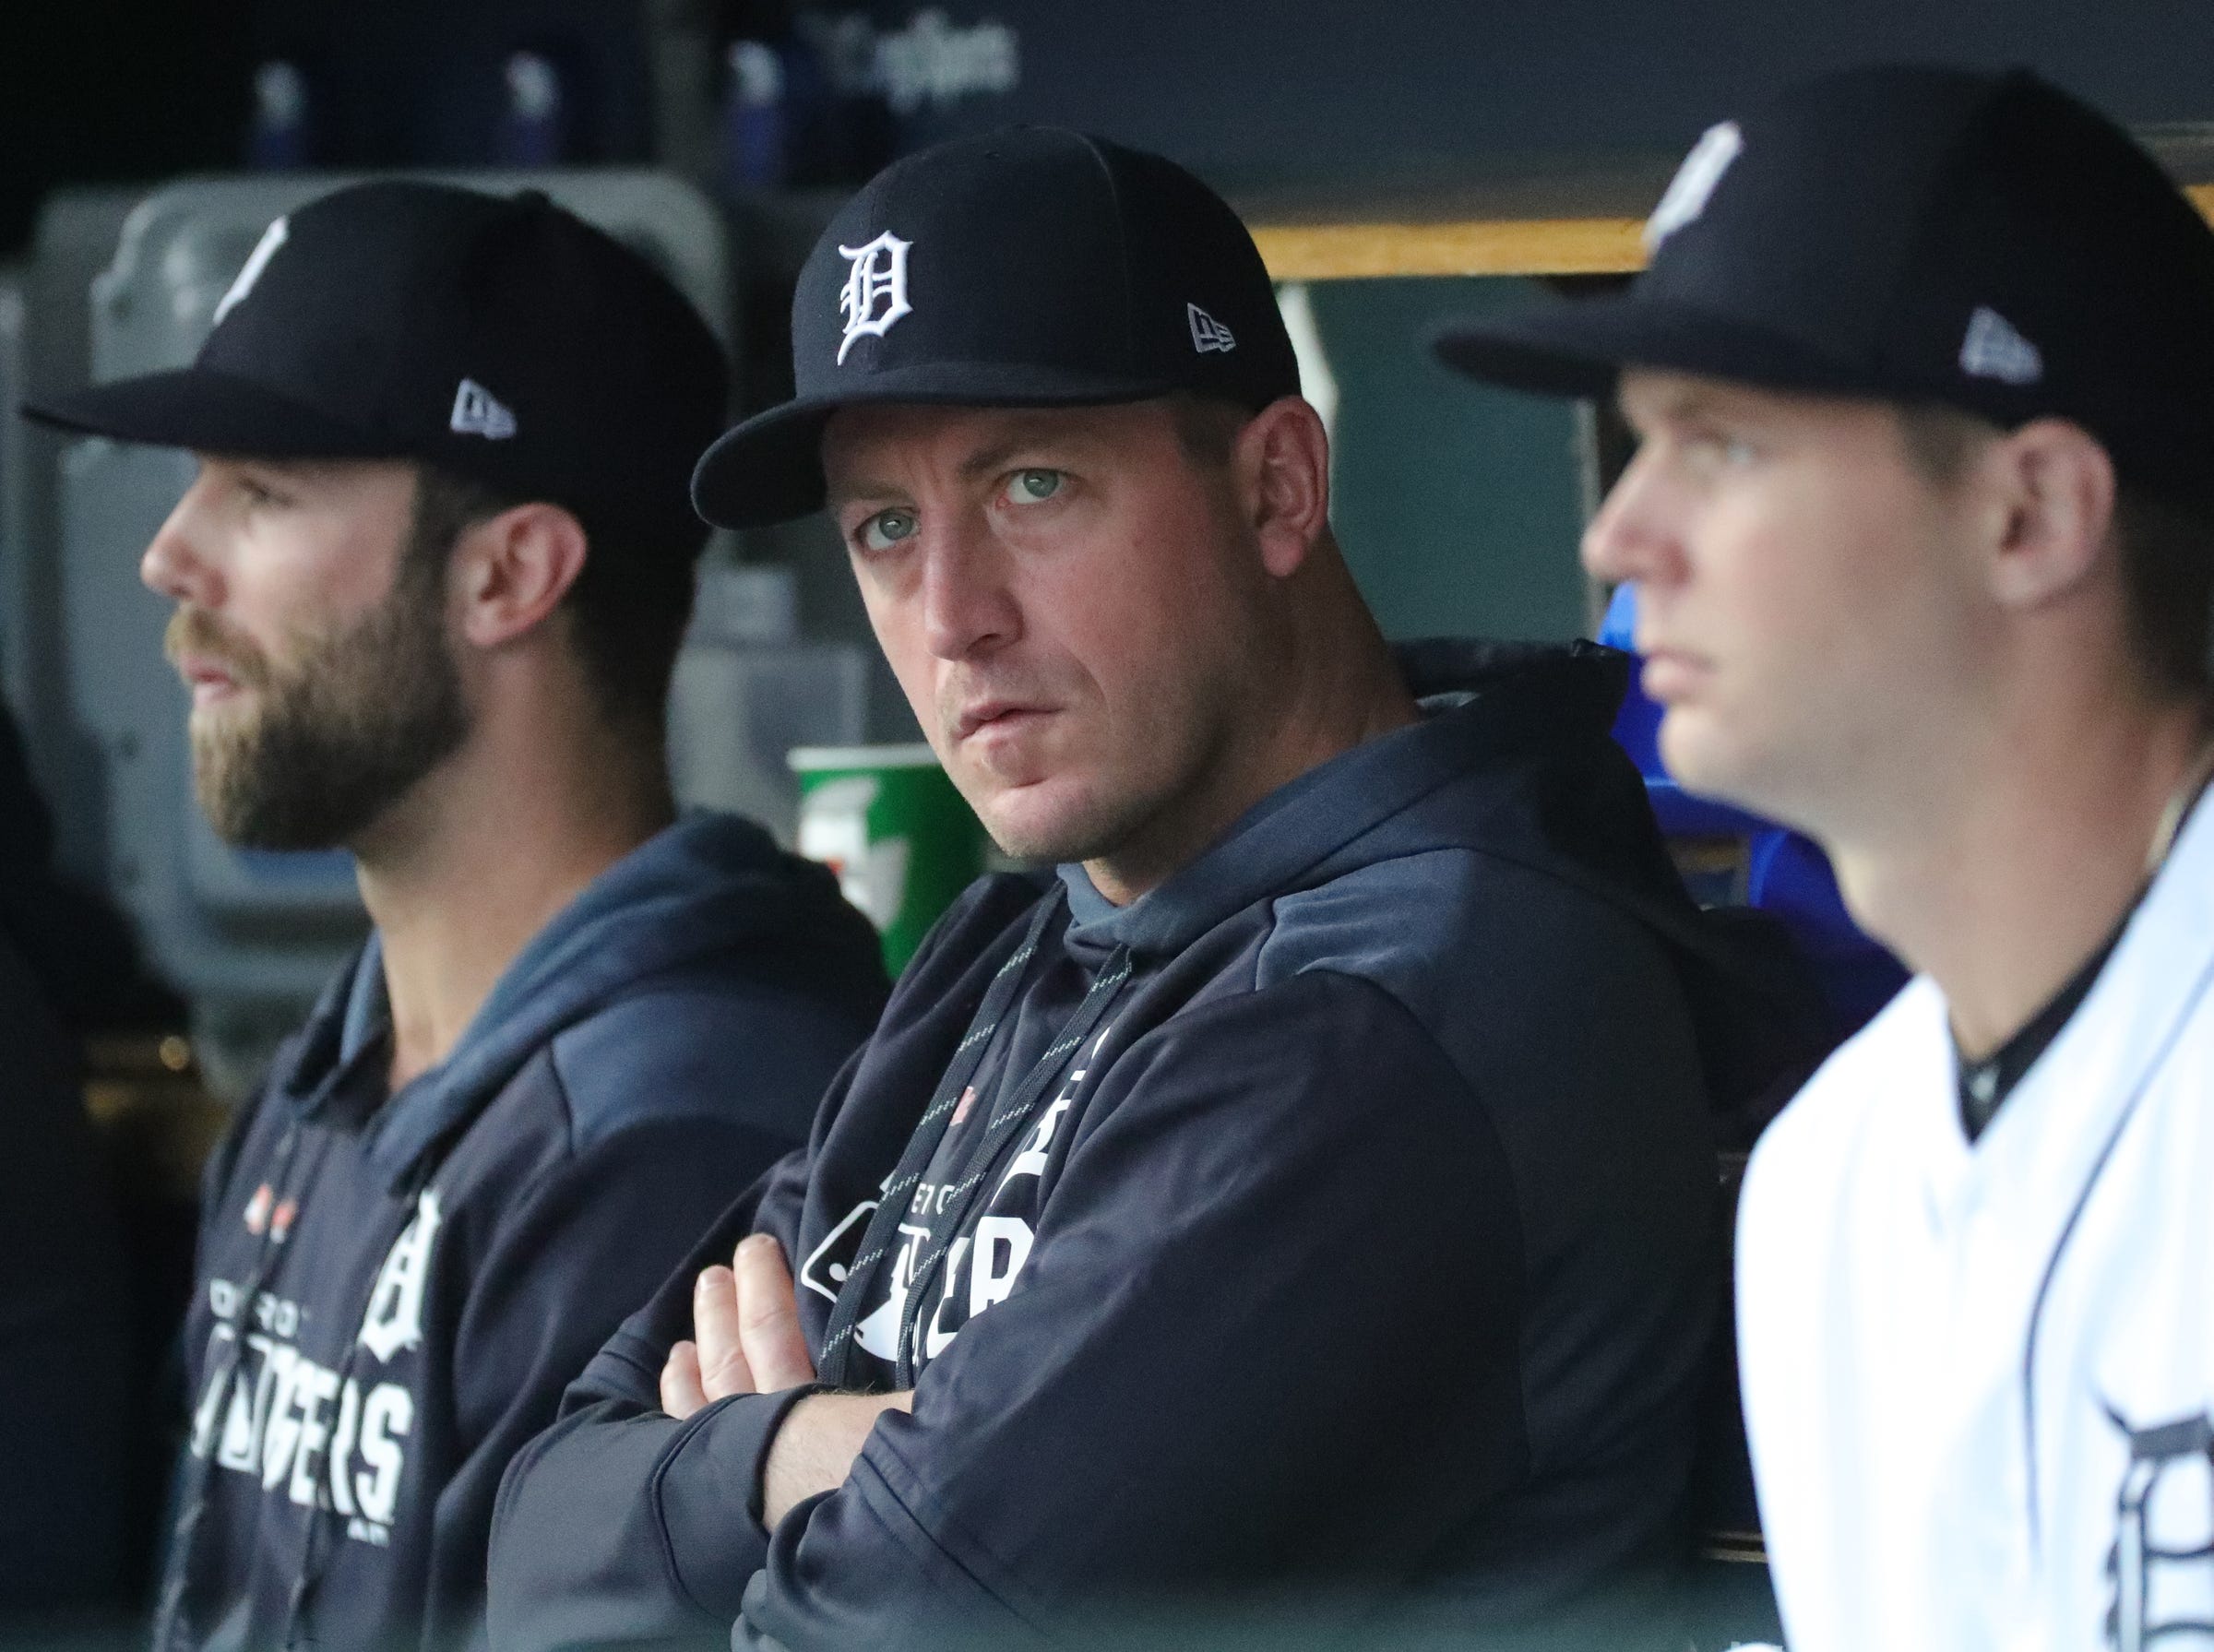 Detroit Tigers pitcher Jordan Zimmermann in the dugout during action against the Houston Astros, Wednesday, May 15, 2019 at Comerica Park.